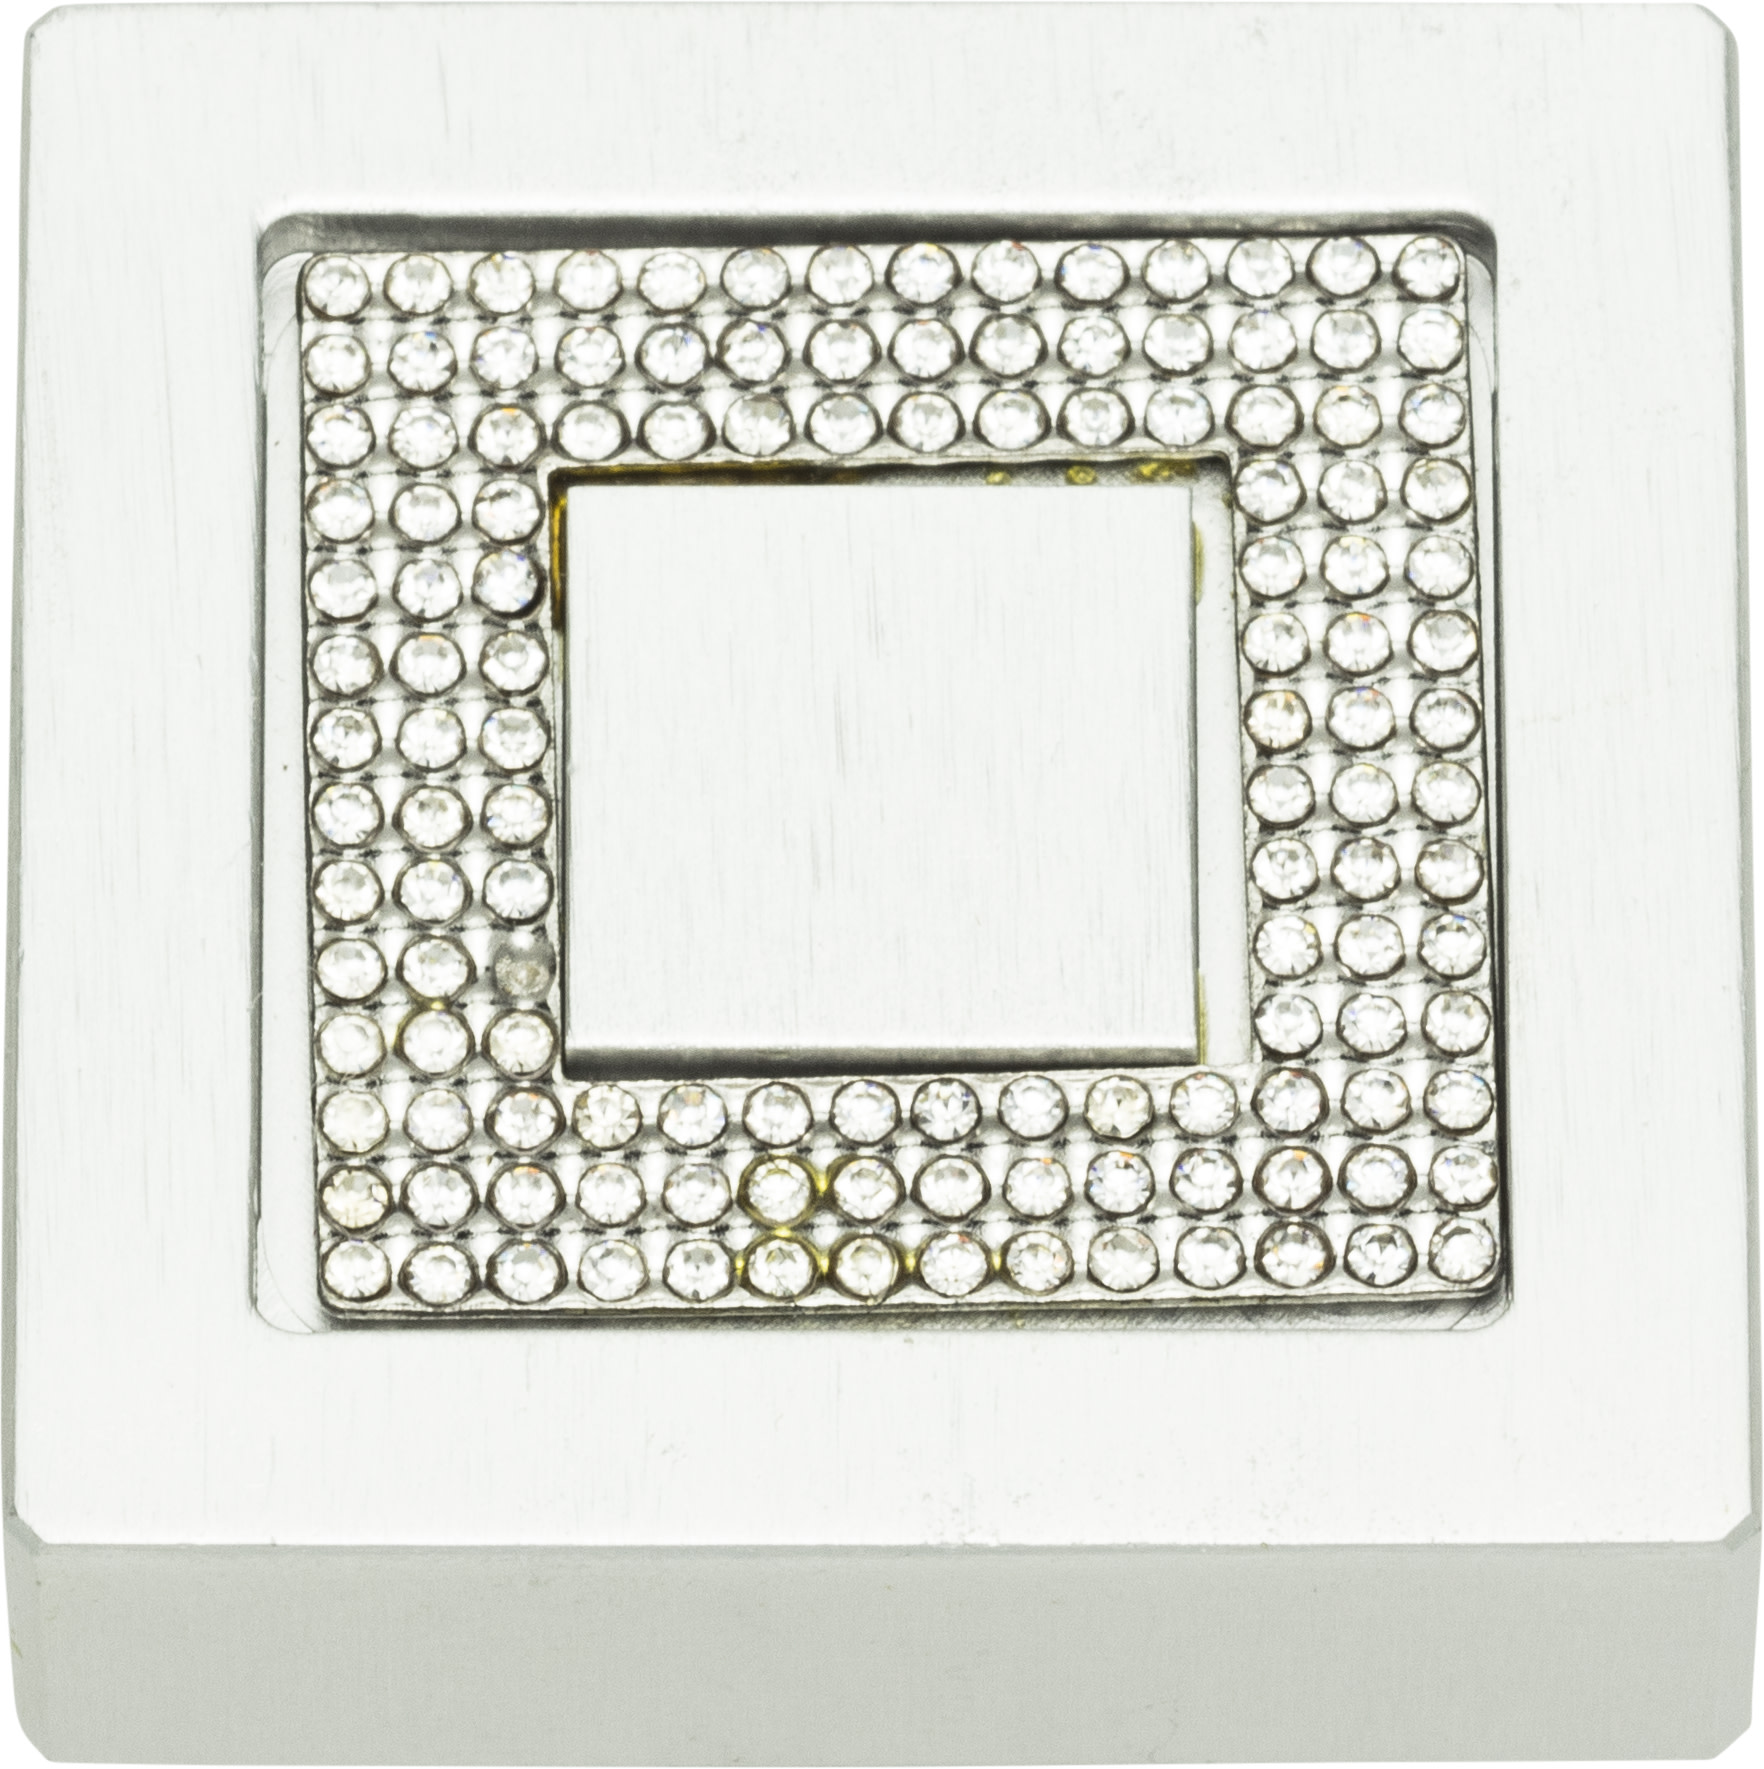 Crystal Pave 1.4 in. Square Knob - 3192-MC (Matte Chrome) - image 4 of 5